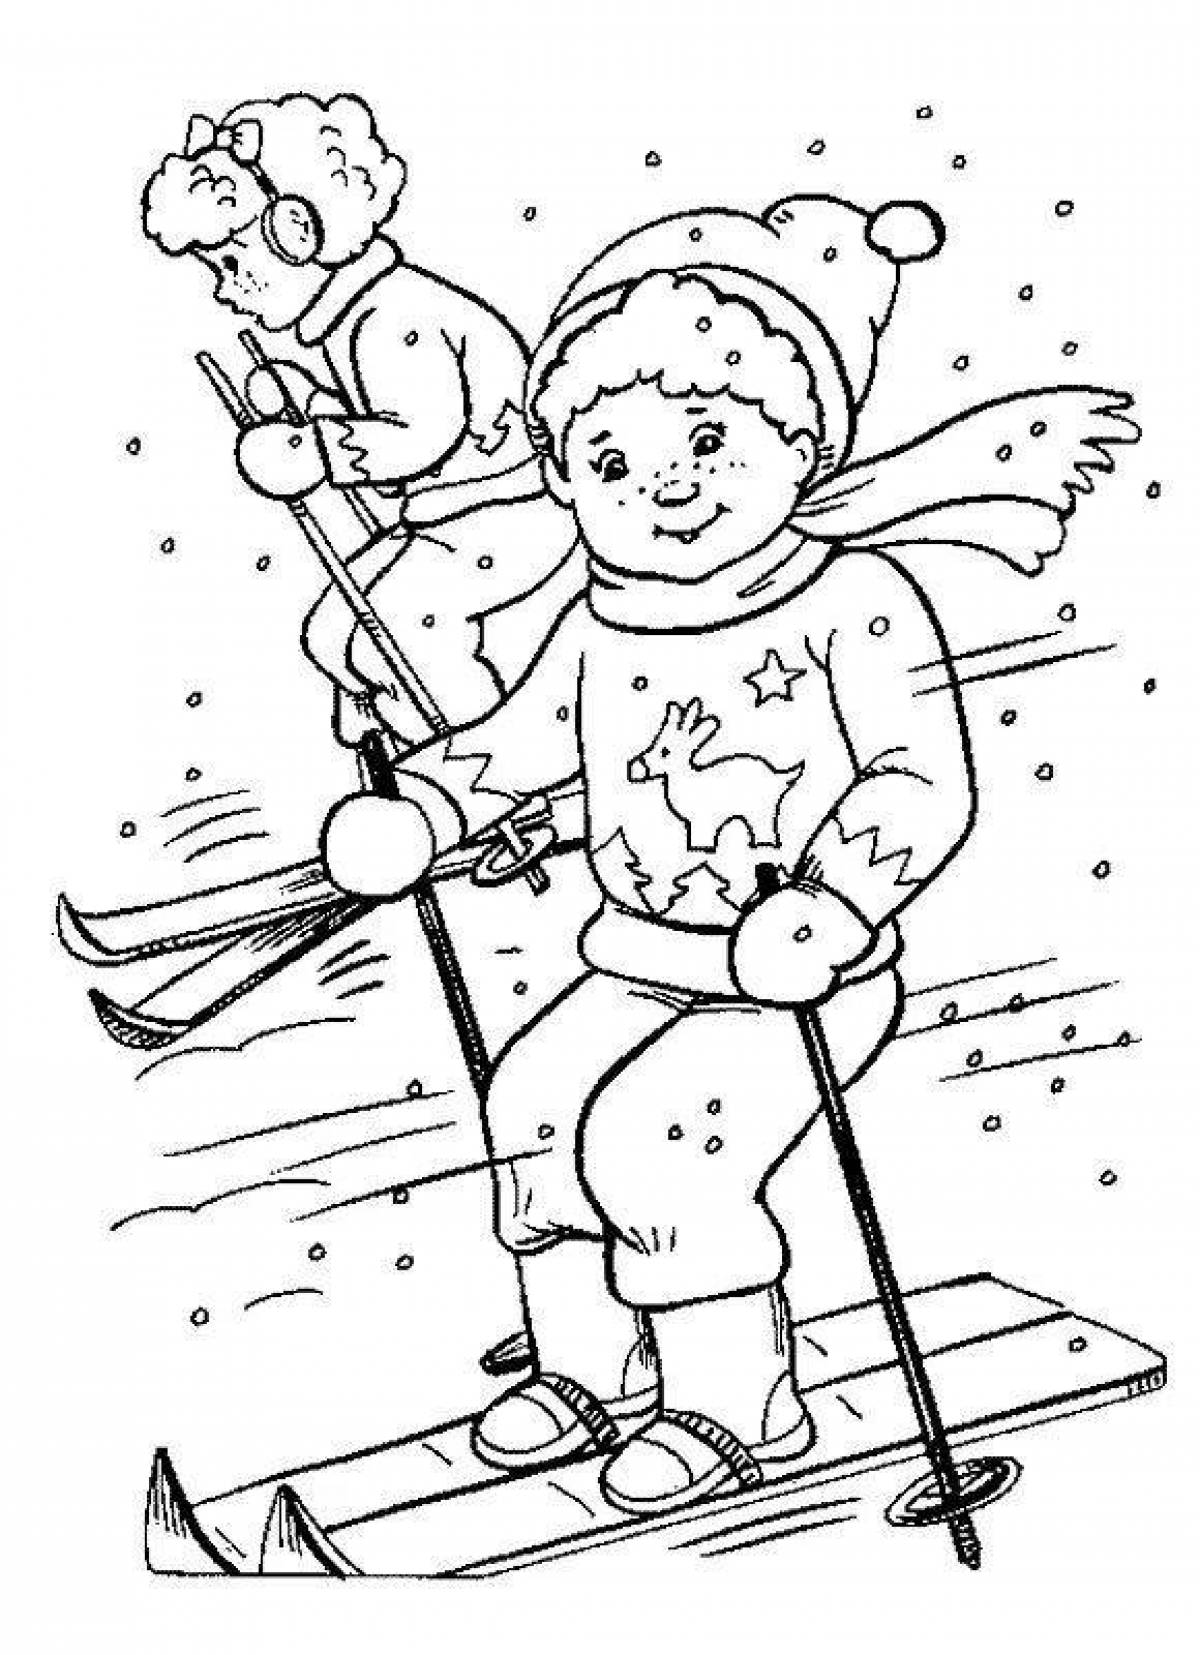 Skier skier coloring page